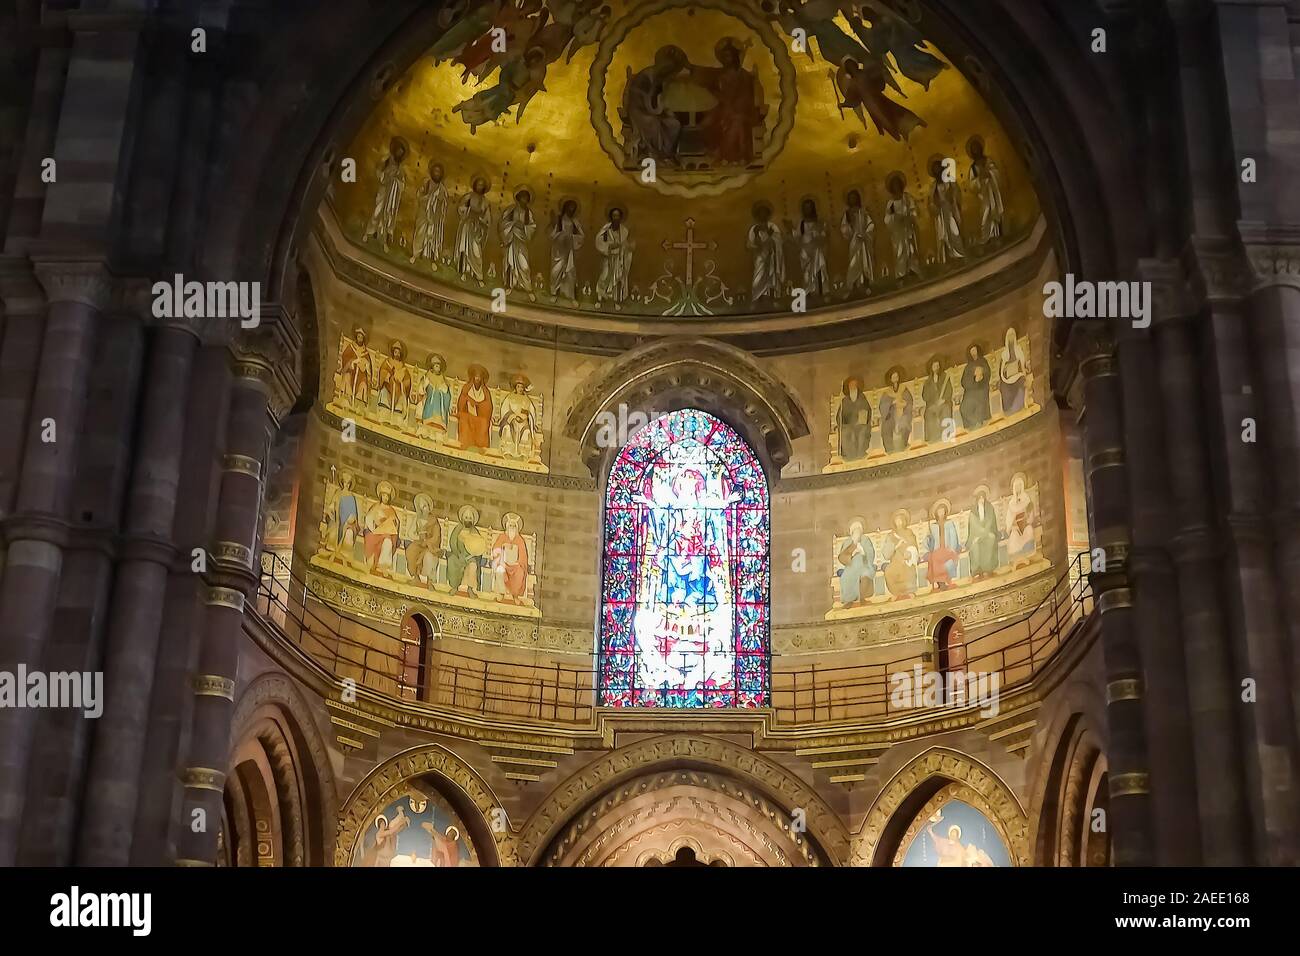 Strasbourg, France - december 1,2019: Detail of main altar inside of Strasbourg Cathedral or the Cathedral of Our Lady of Strasbourg Stock Photo